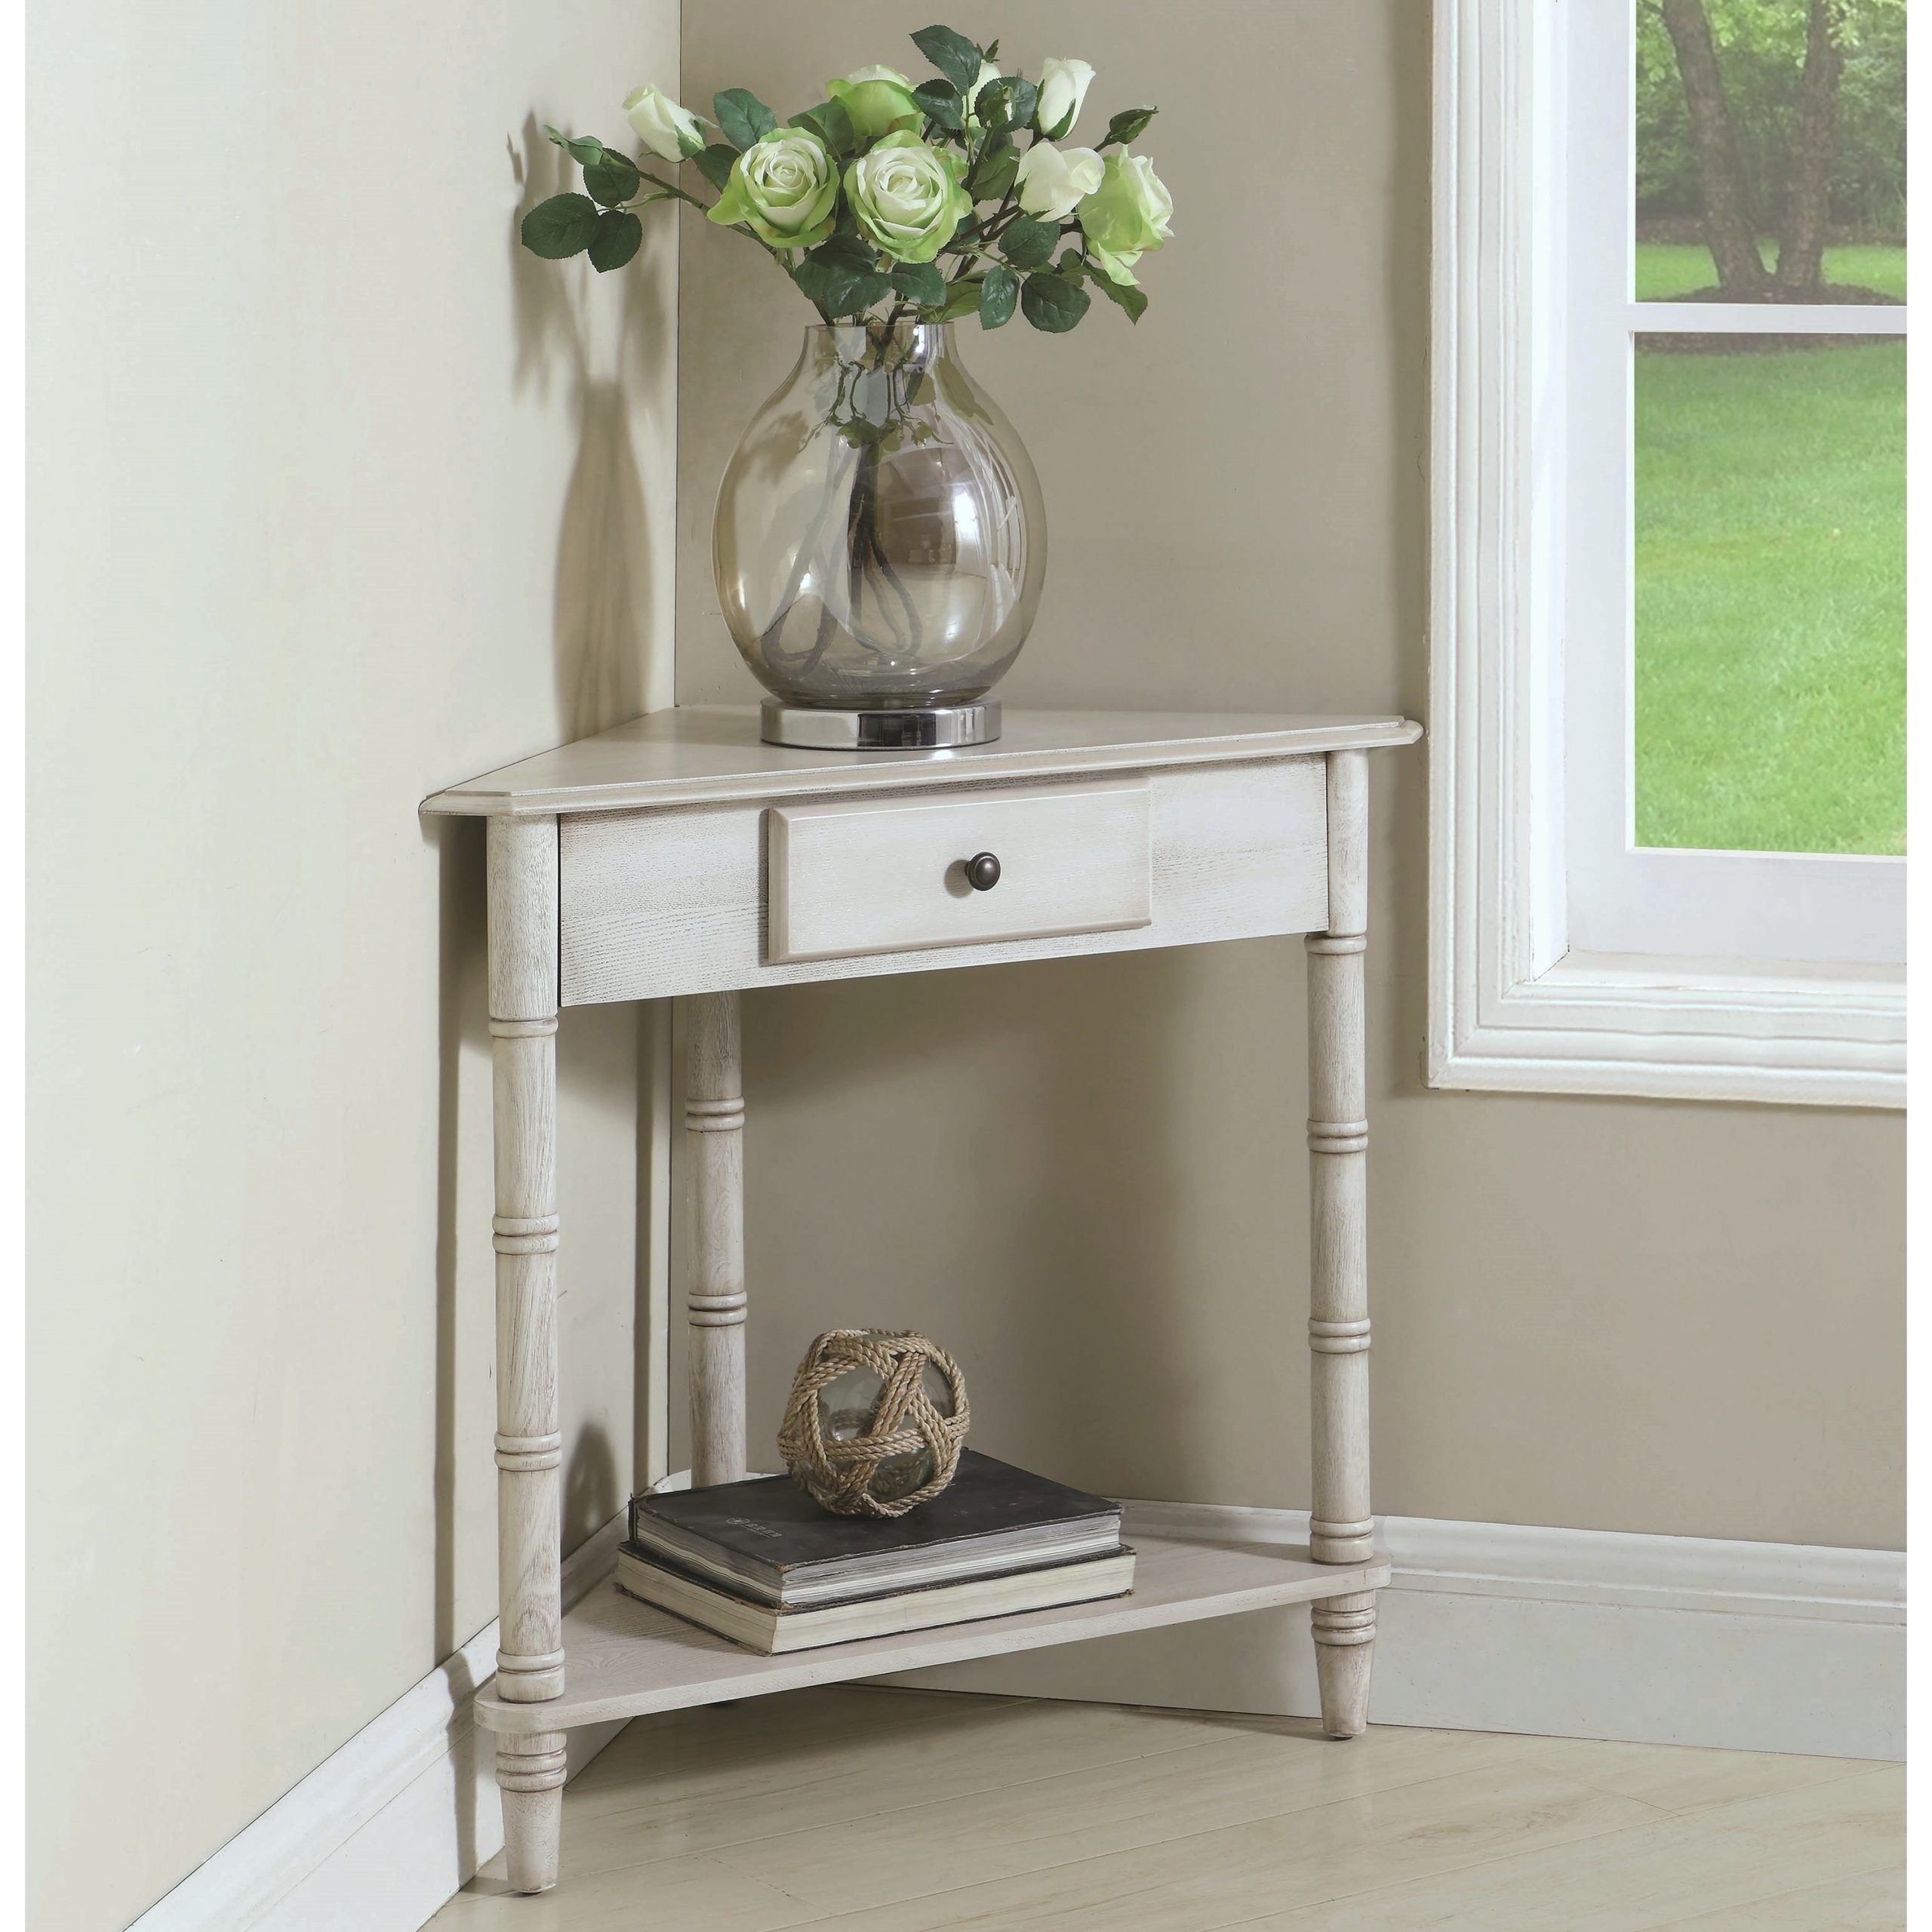 Antique White Console Table With Drawers – Antique Poster Inside Square Weathered White Wood Console Tables (View 6 of 20)